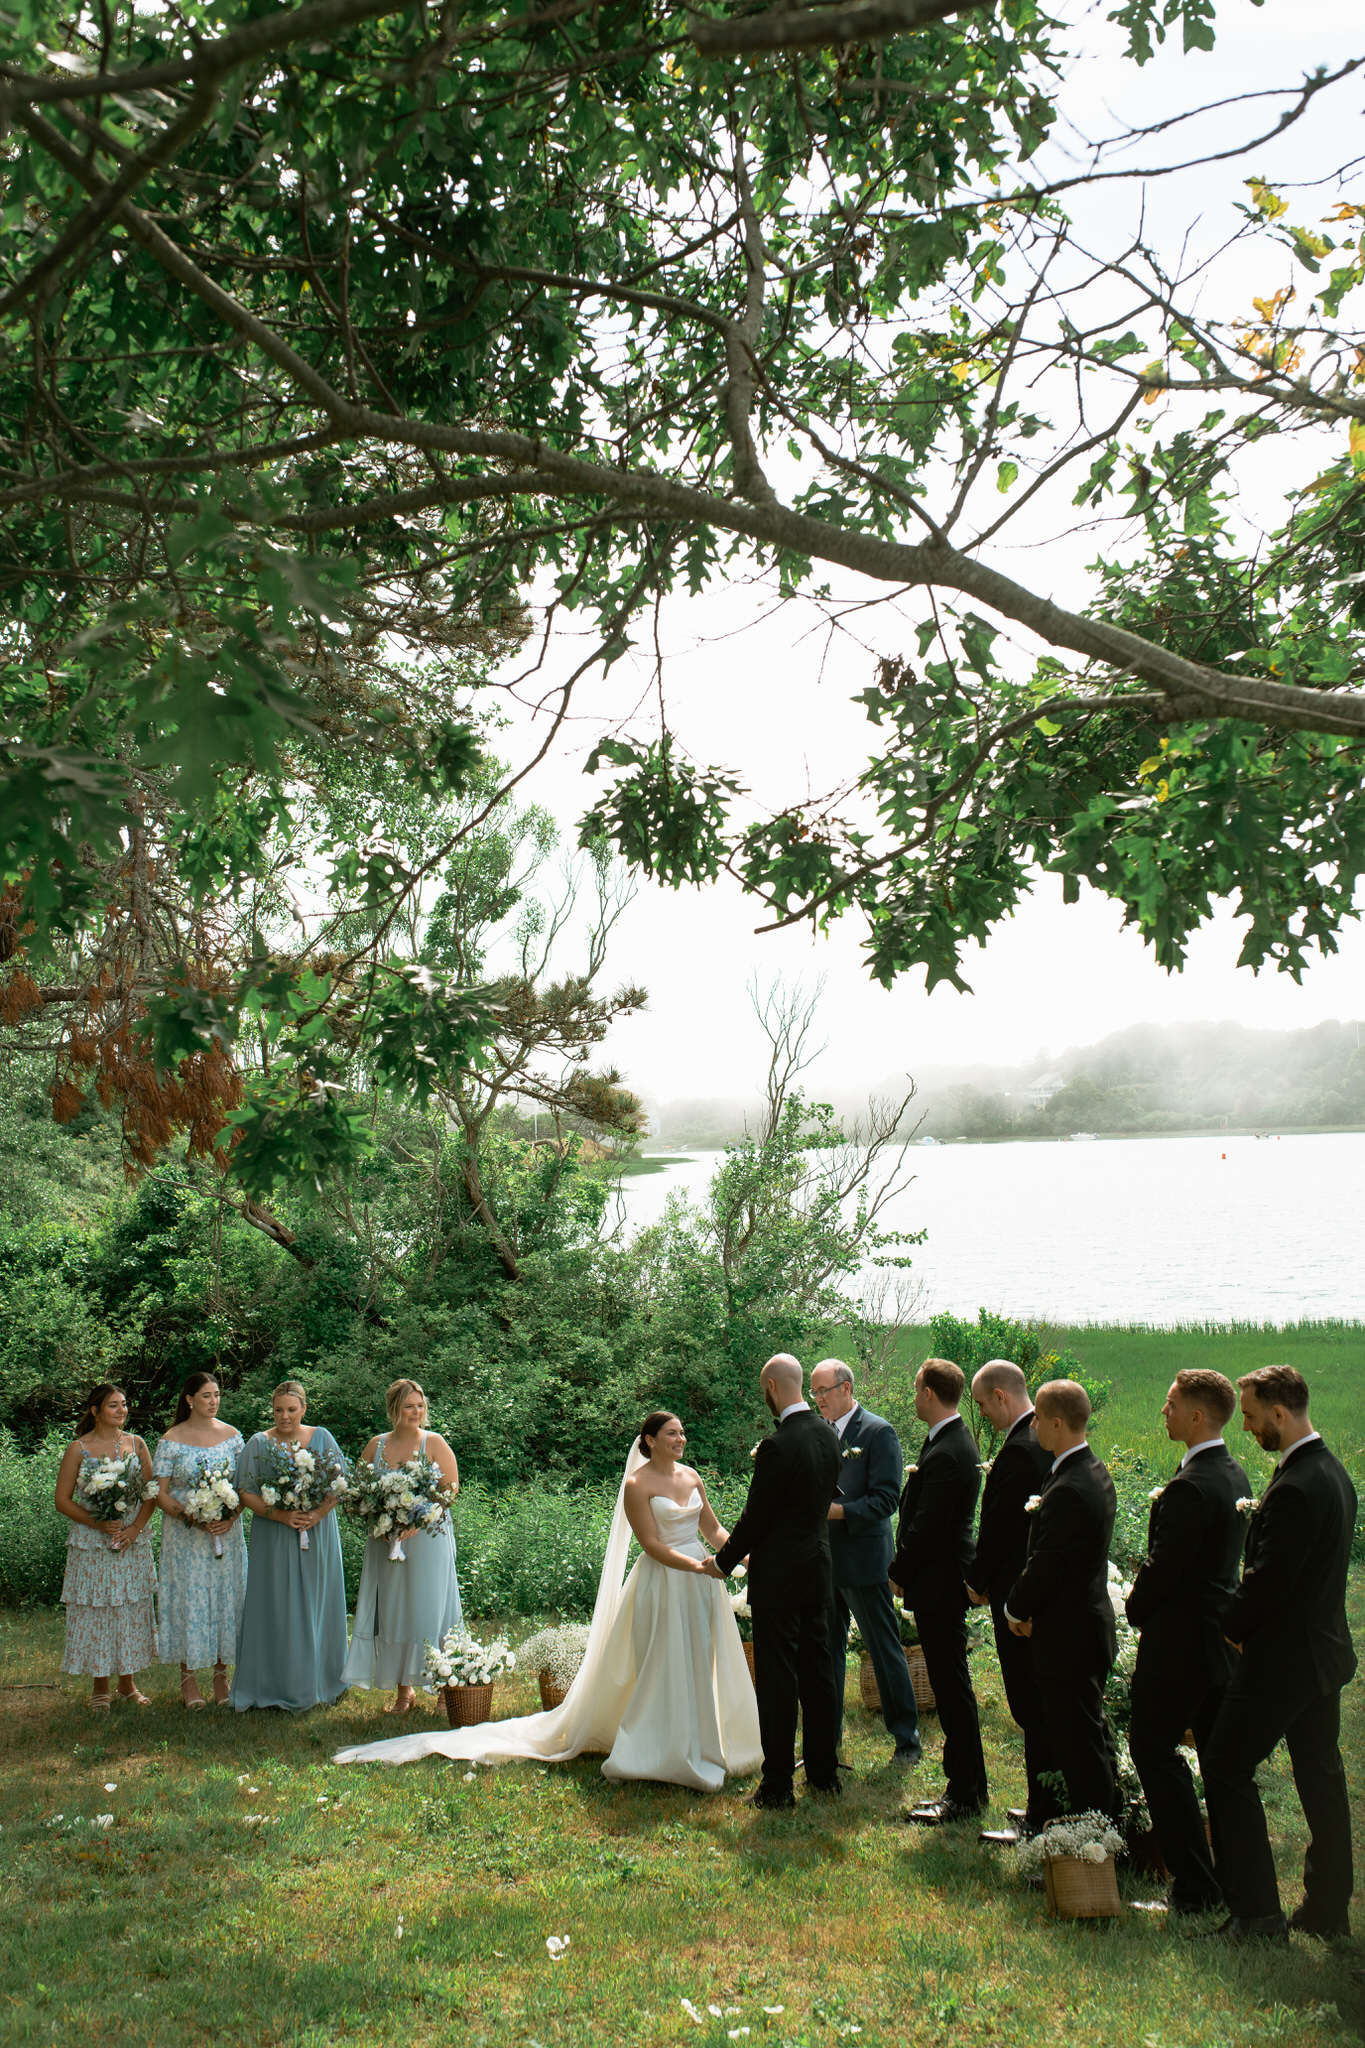 Fun Waterfront Wedding at the Underwood Estate/Mack Property in Cape Cod Chatham, Massachusetts